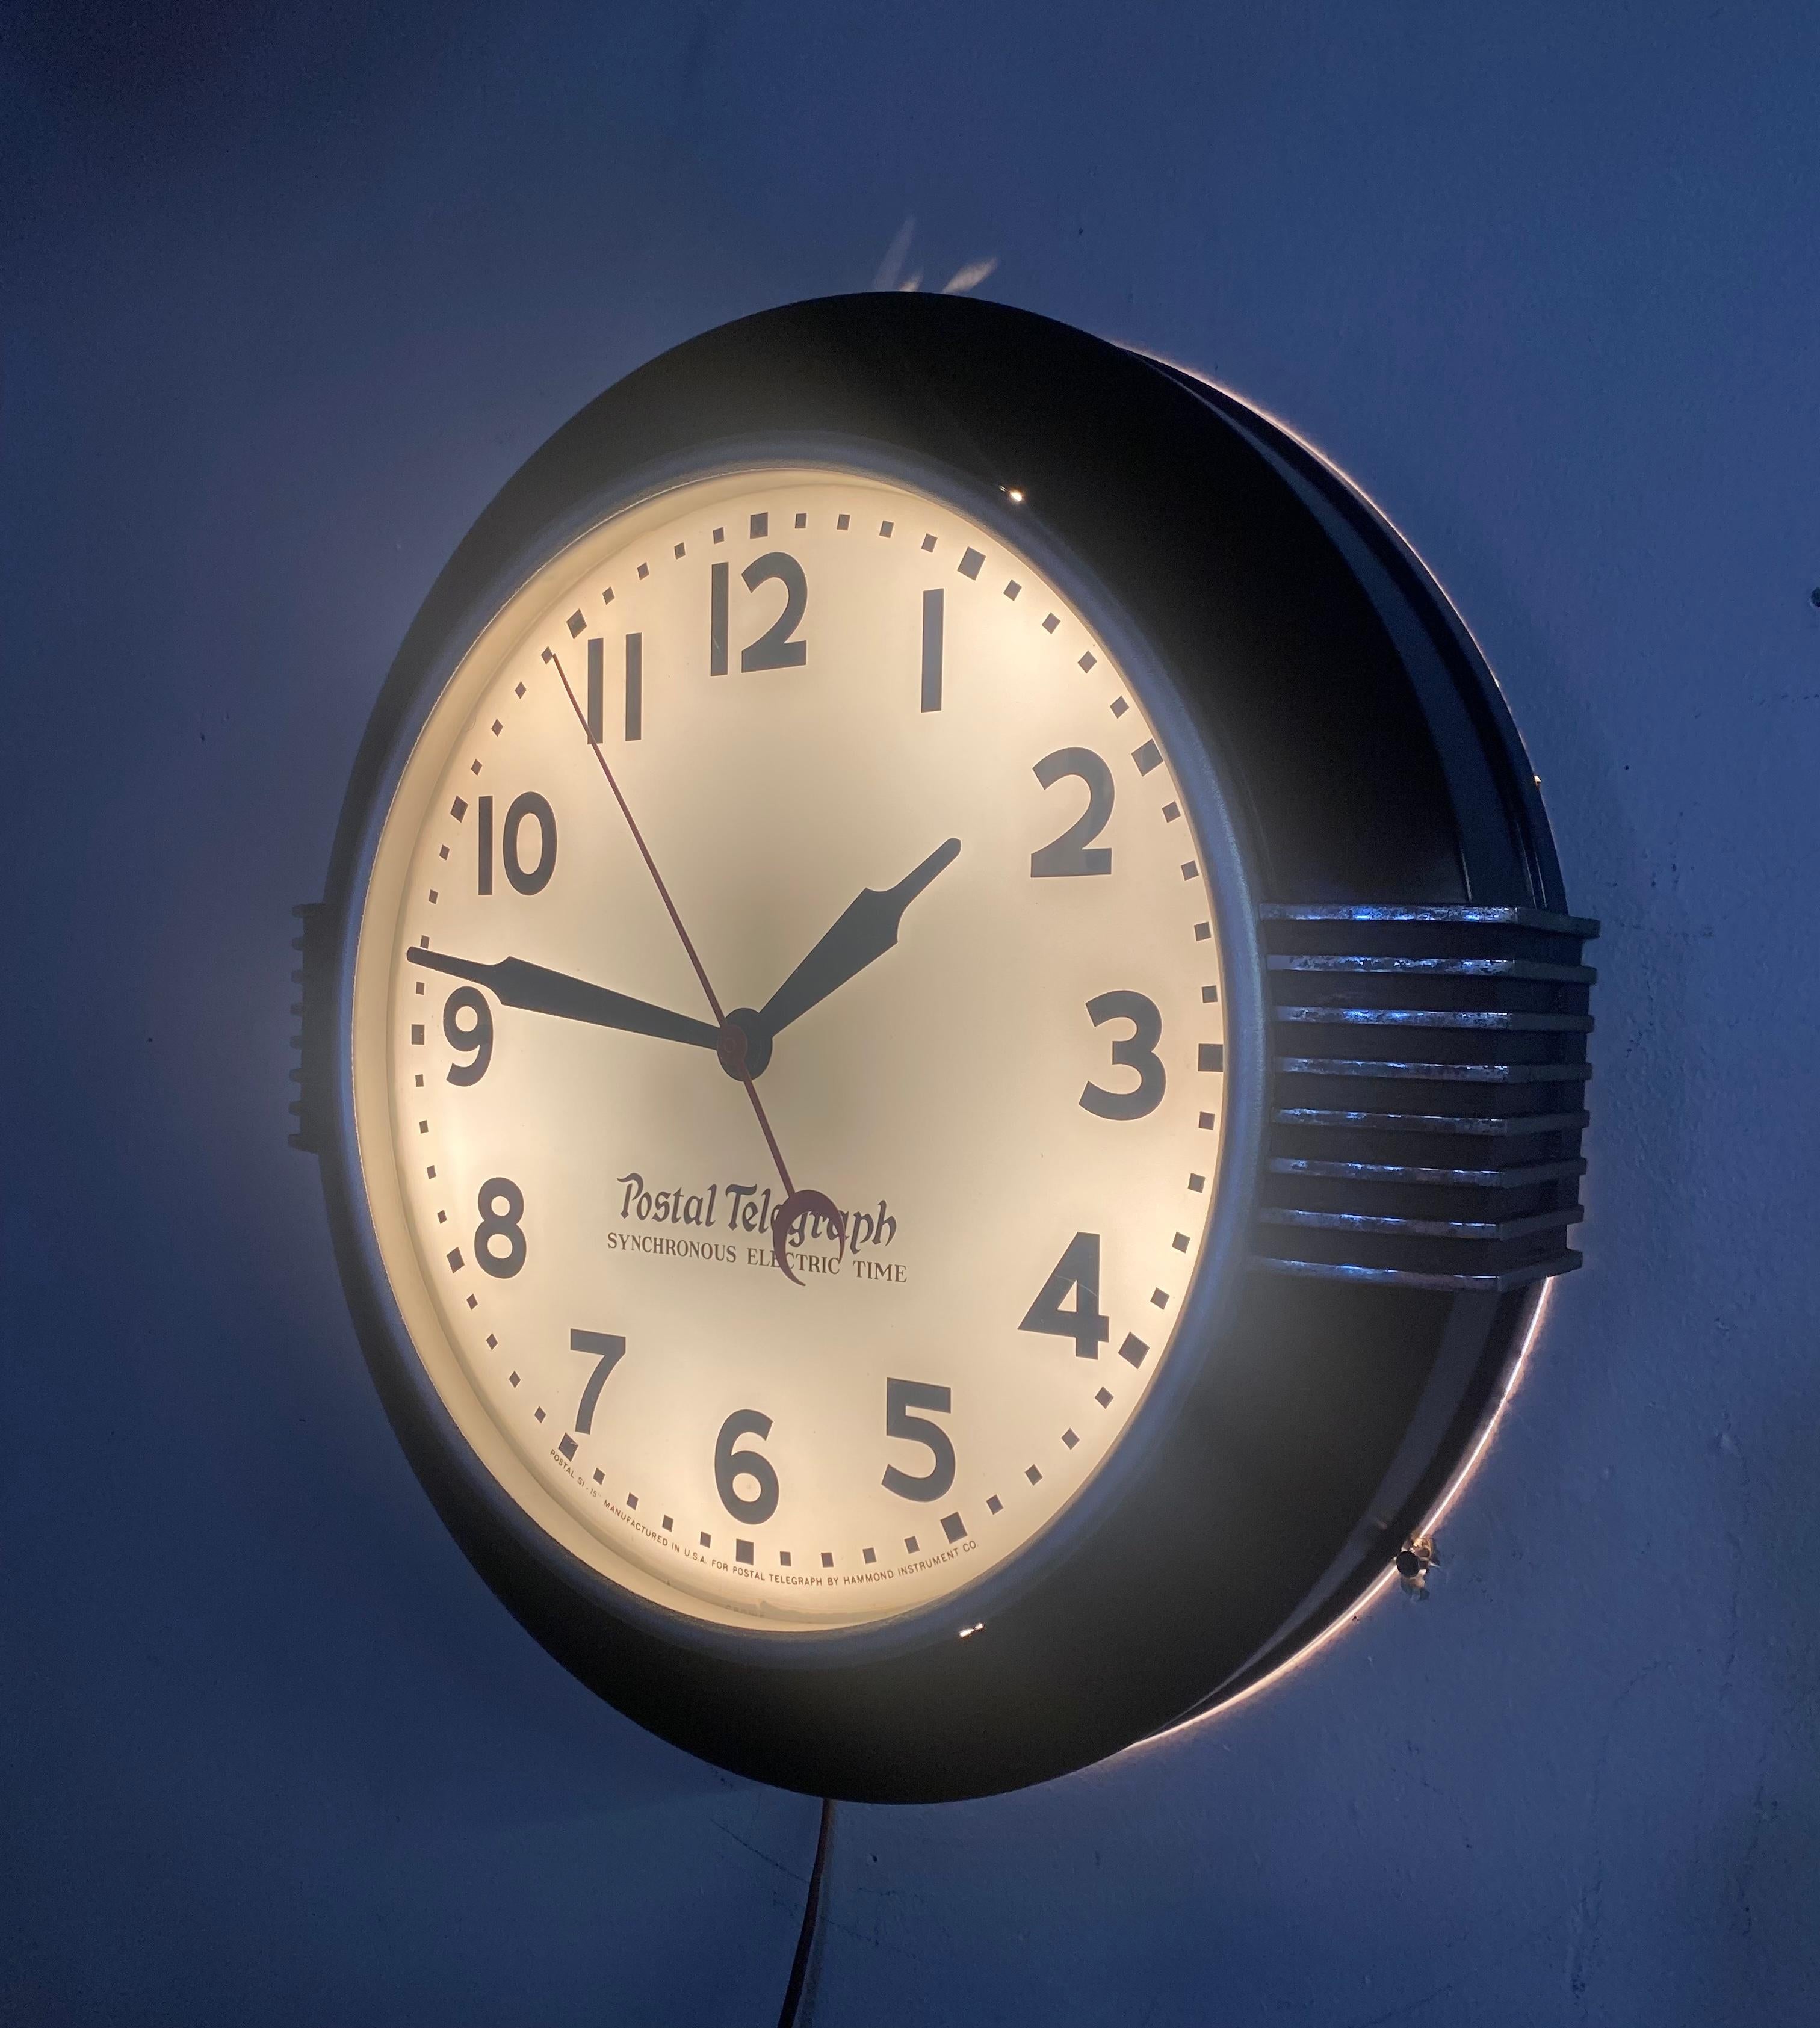 This iconic and beautifully designed, large American Art Deco wall clock is by The Hammond Instrument Company of Chicago, Illinois. This design was first released under the name of the 